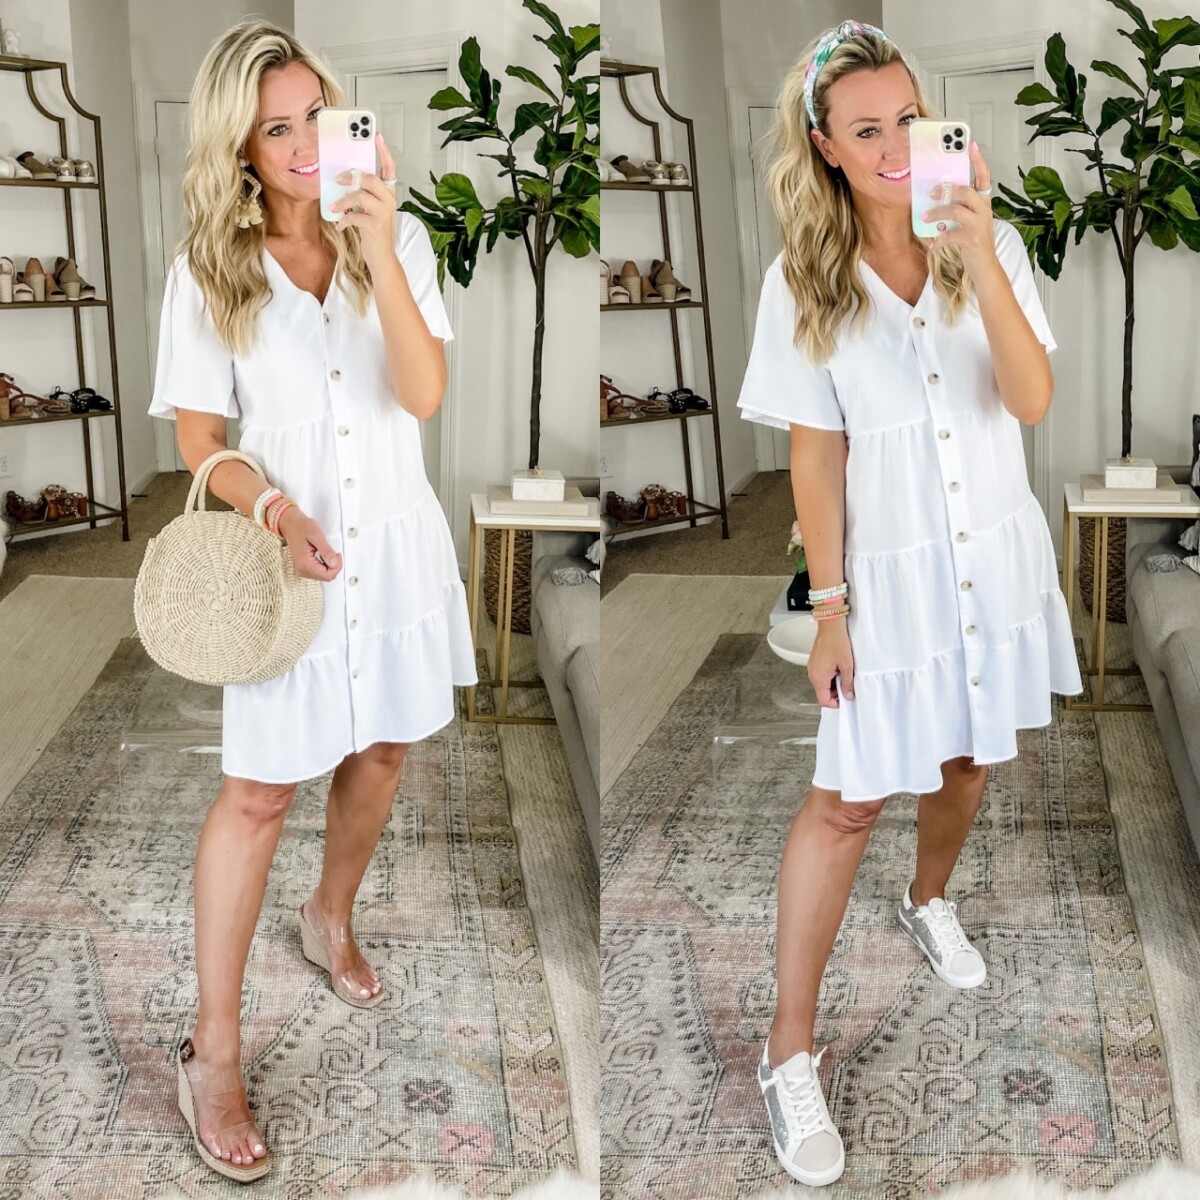 amazon summer dress | Amazon Prime Day by popular Houston fashion blog, Haute and Humid: collage image of a woman wearing a white button front mini dress, white sneakers, clear strap platform espadrilles, knot headband, raffia statement earrings, and holding a woven circular handbag. 